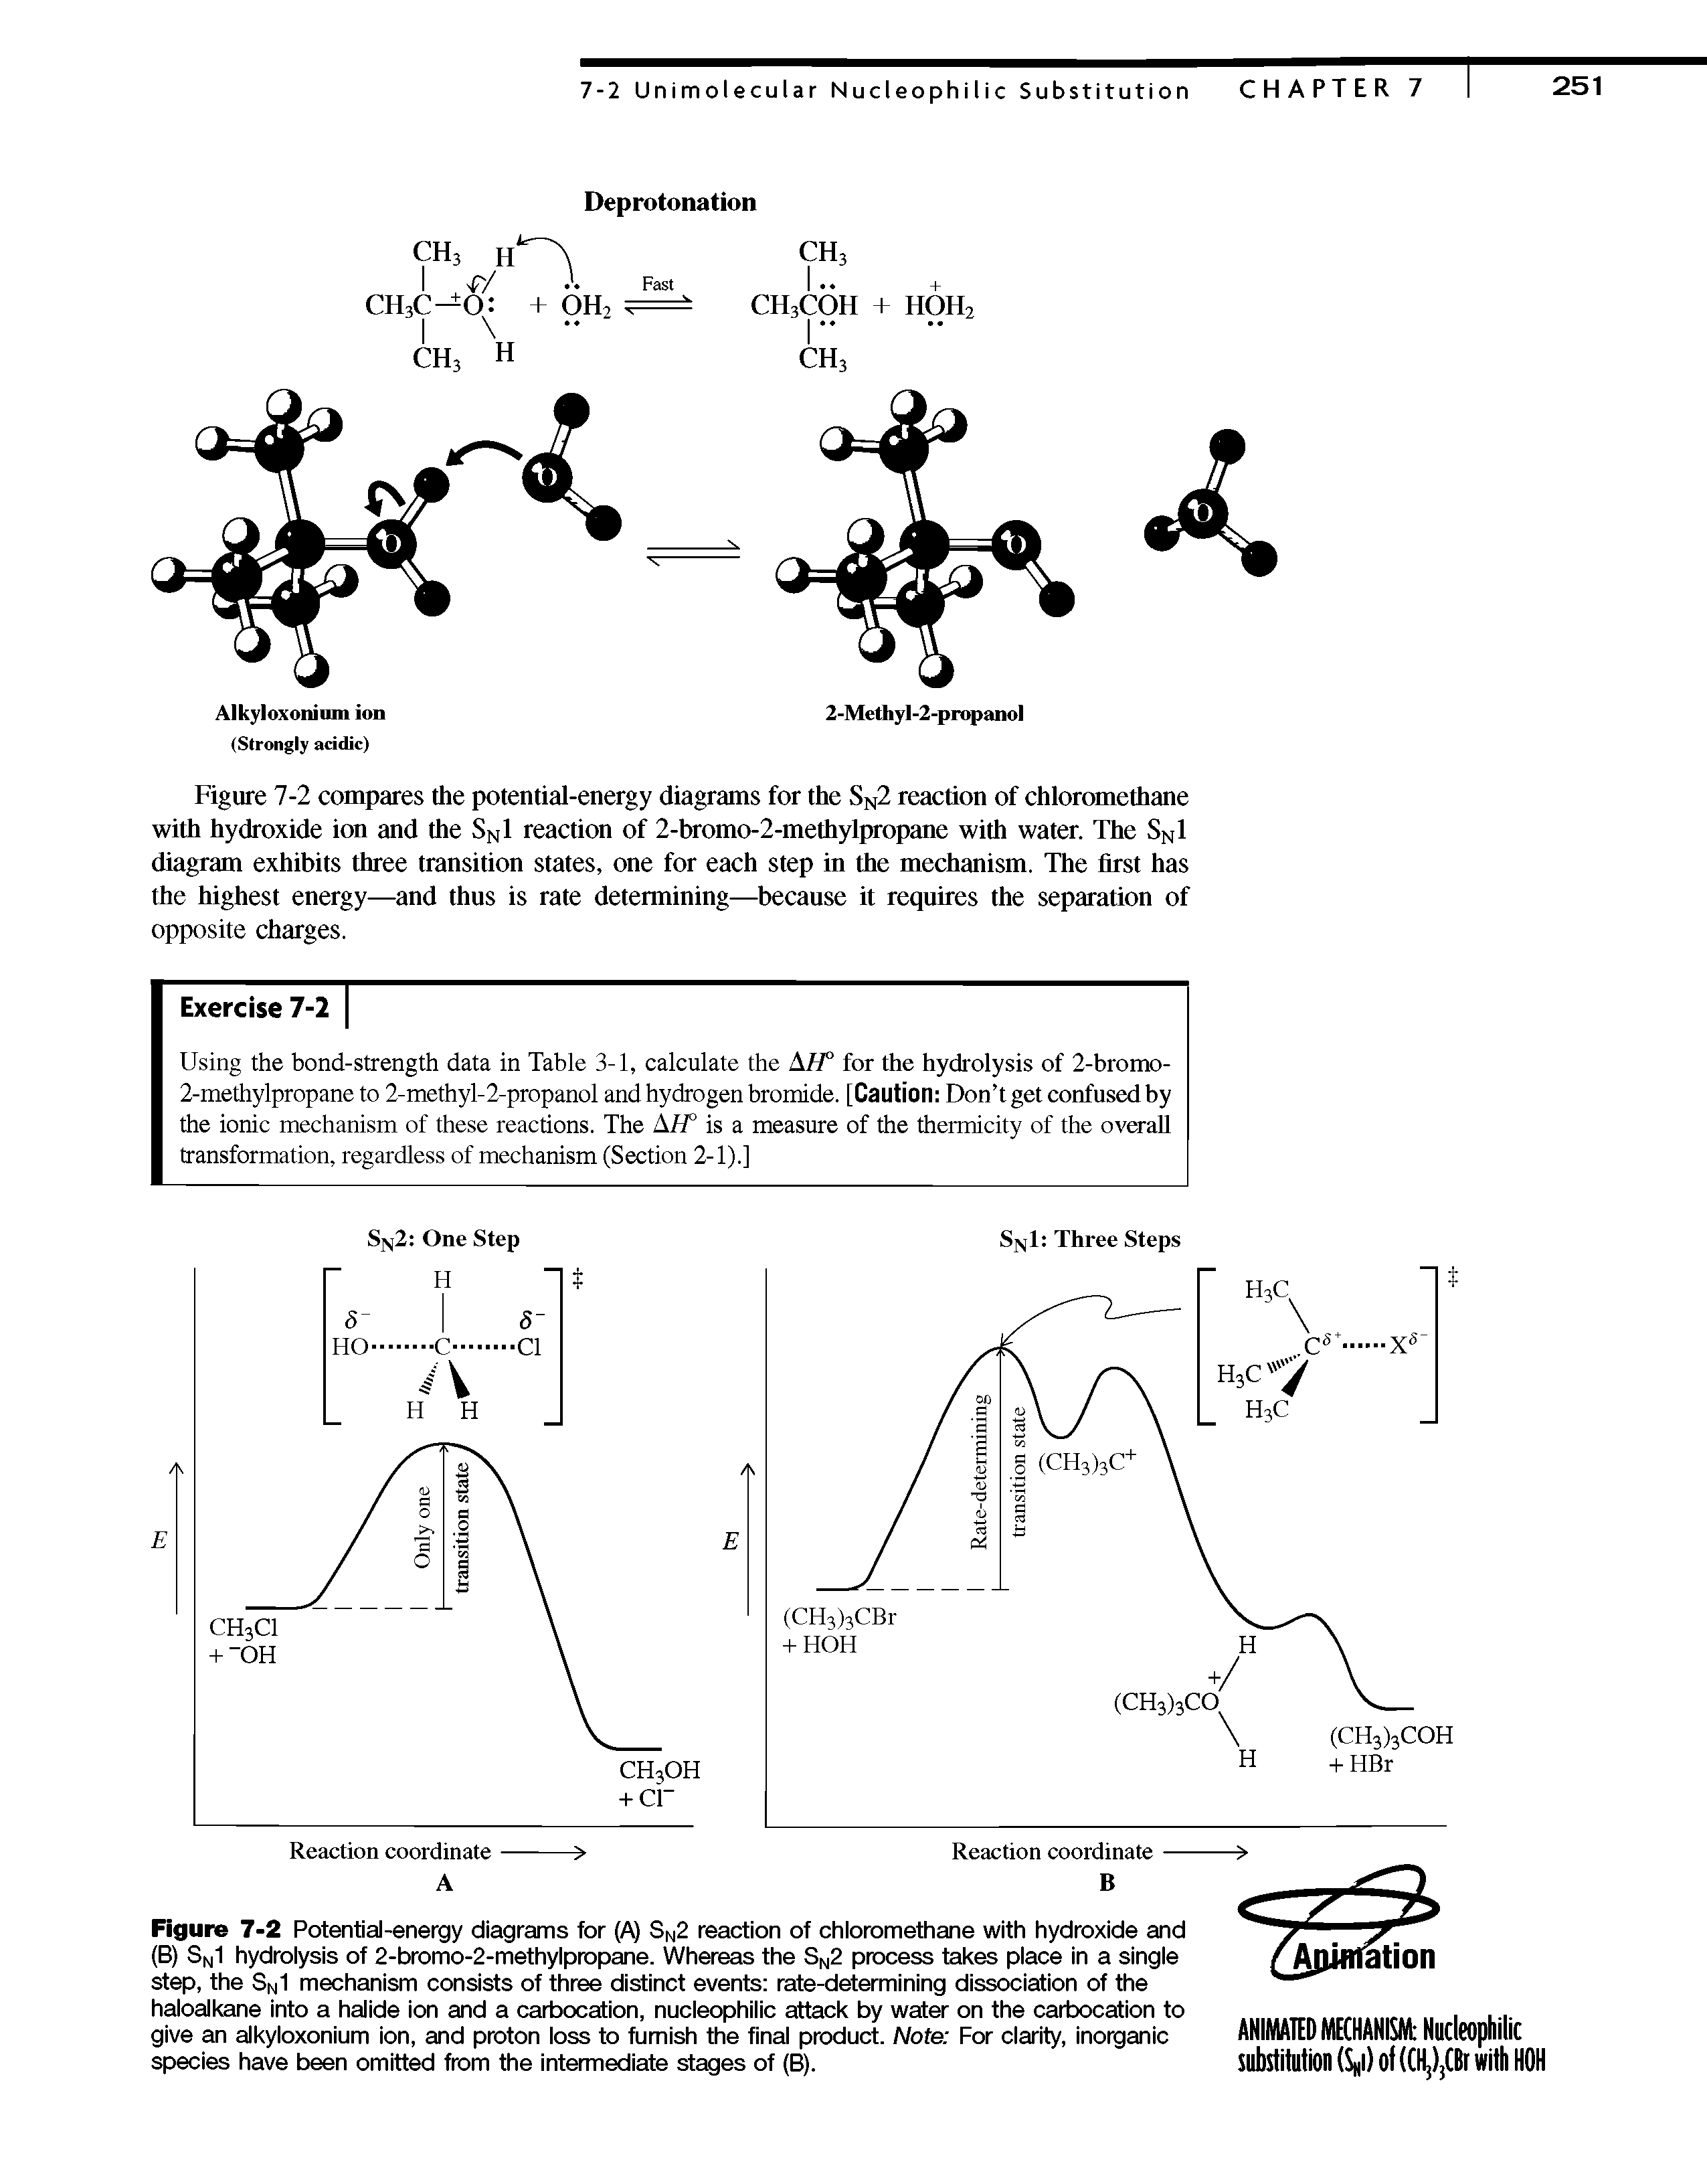 Figure 7-2 Potential-energy diagrams for (/ Sn2 reaction of chioromethane with hydroxide and (B) Sn1 hydroiysis of 2-bromo-2-methyipropane. Whereas the Sn2 process takes piace in a singie step, the SnI mechanism consists of three distinct events rate-determining dissociation of the haioalkane into a halide ion and a carbocation, nucieophiiic attack by water on the carbocation to give an alkyloxonium ion, and proton ioss to furnish the finai product. Note For ciarity, inorganic species have been omitted from the intermediate stages of (B).